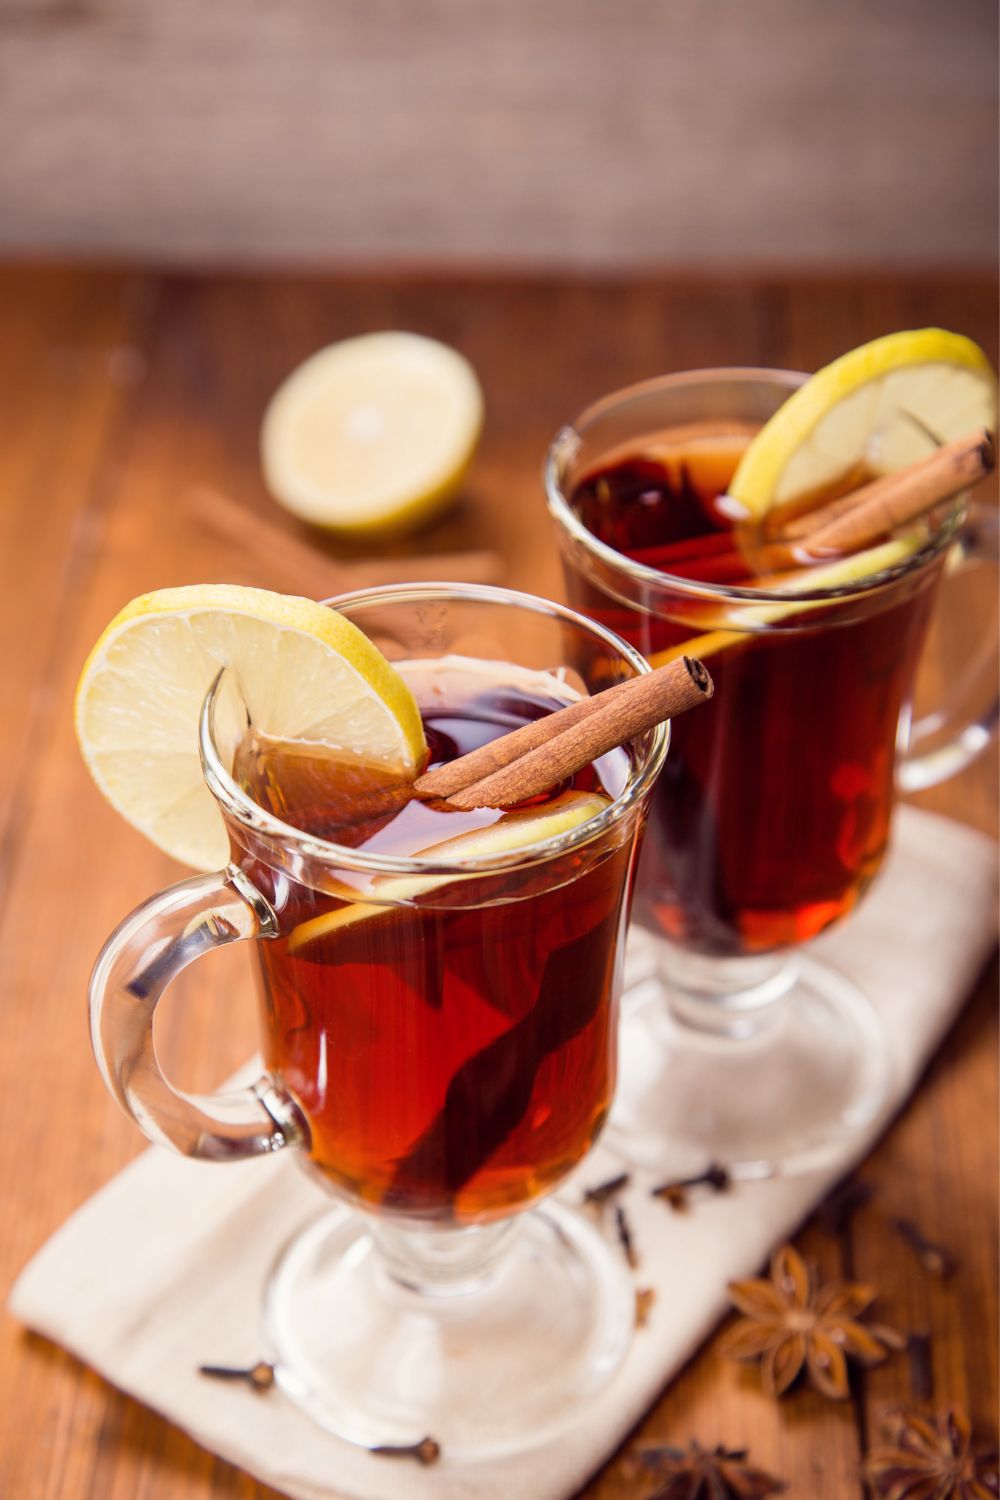 A hot coffee grog in a glass garnished with cinnamon stick and lemon.